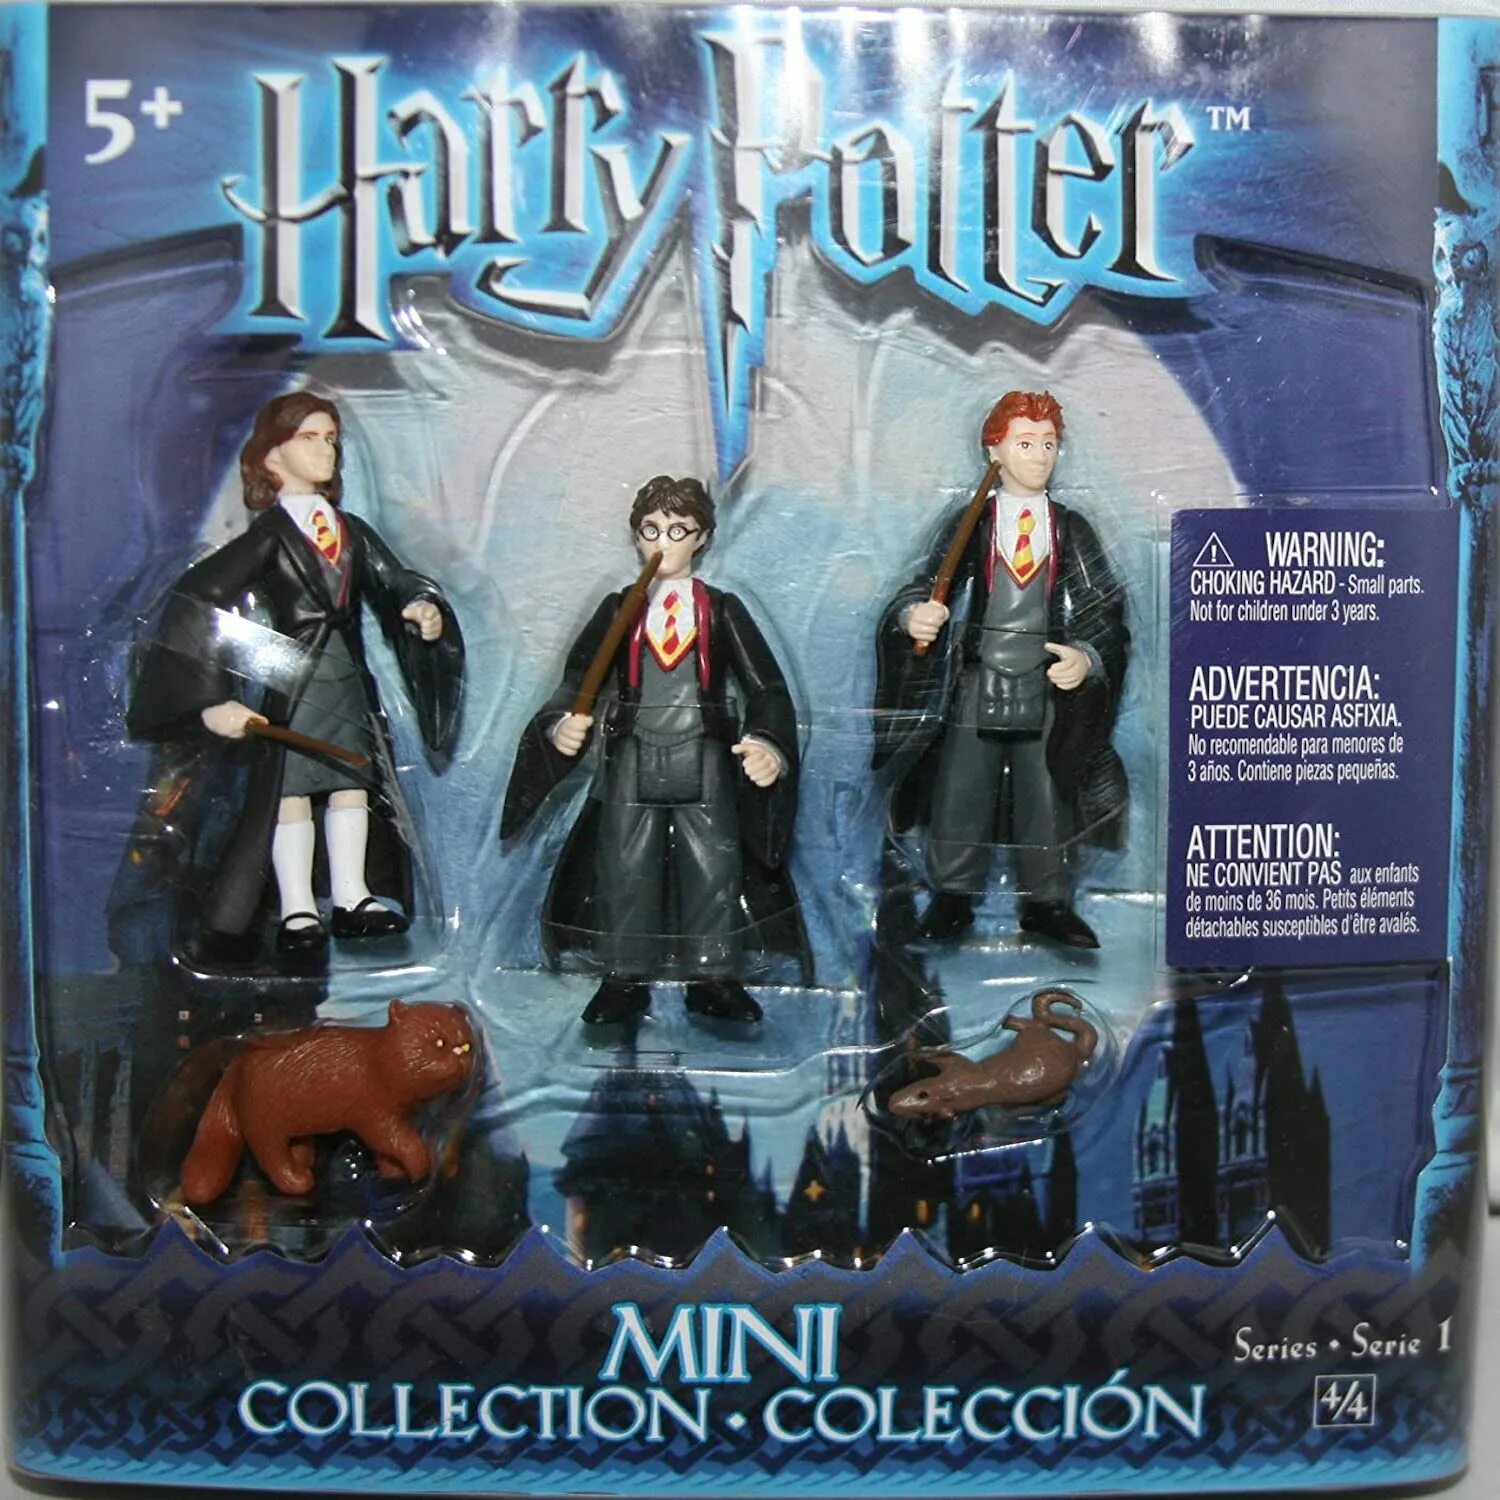 Mini collection. Набор игрушек Harry Potter Magical Minis.